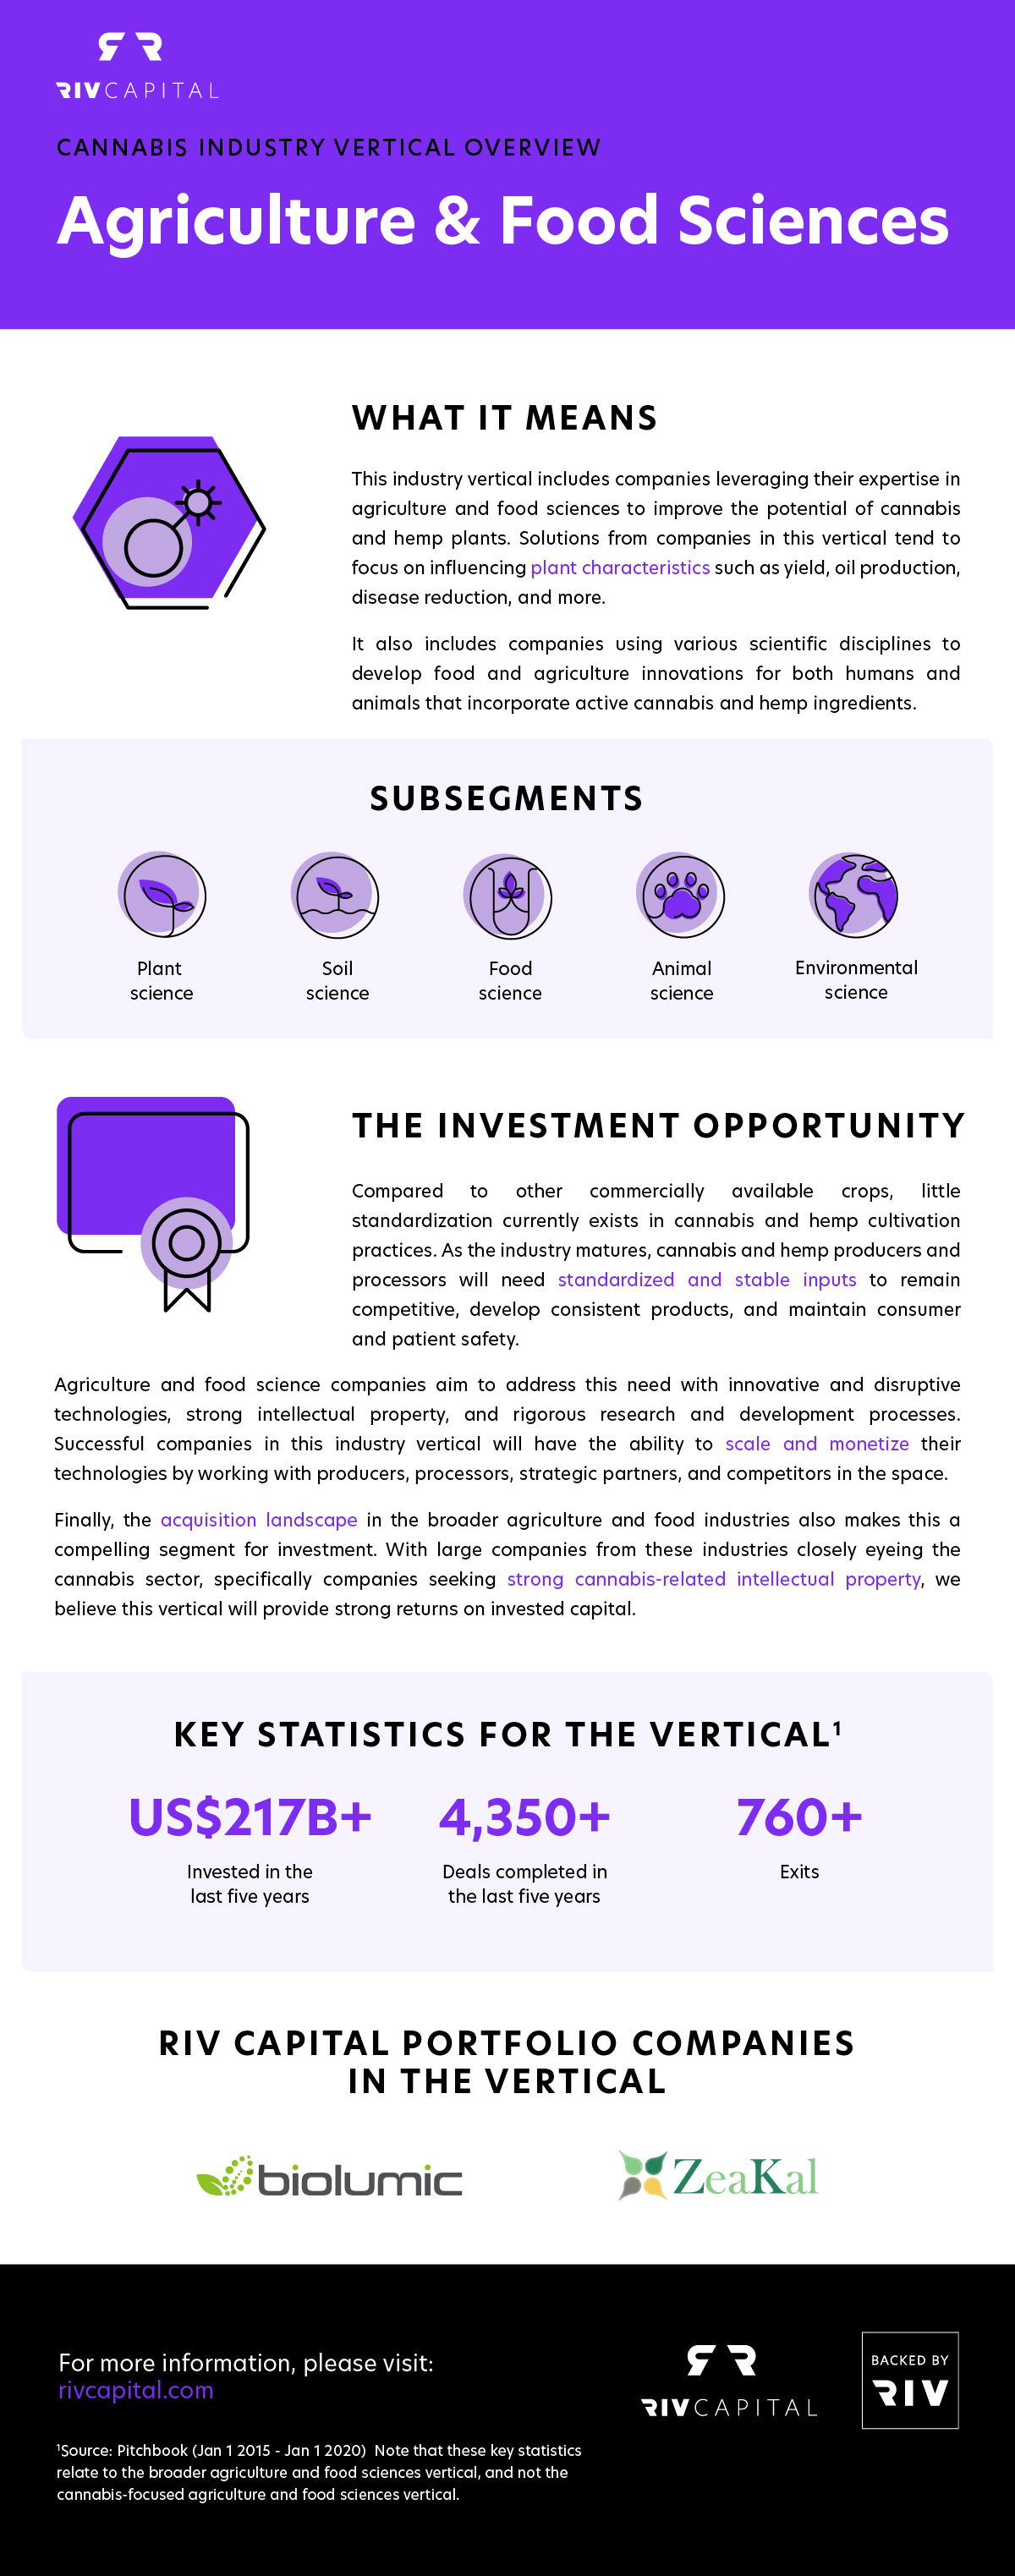 This infographic provides an overview of the agriculture and food sciences vertical within the cannabis industry, highlighting areas such as the investment opportunity, subsegments, and more.